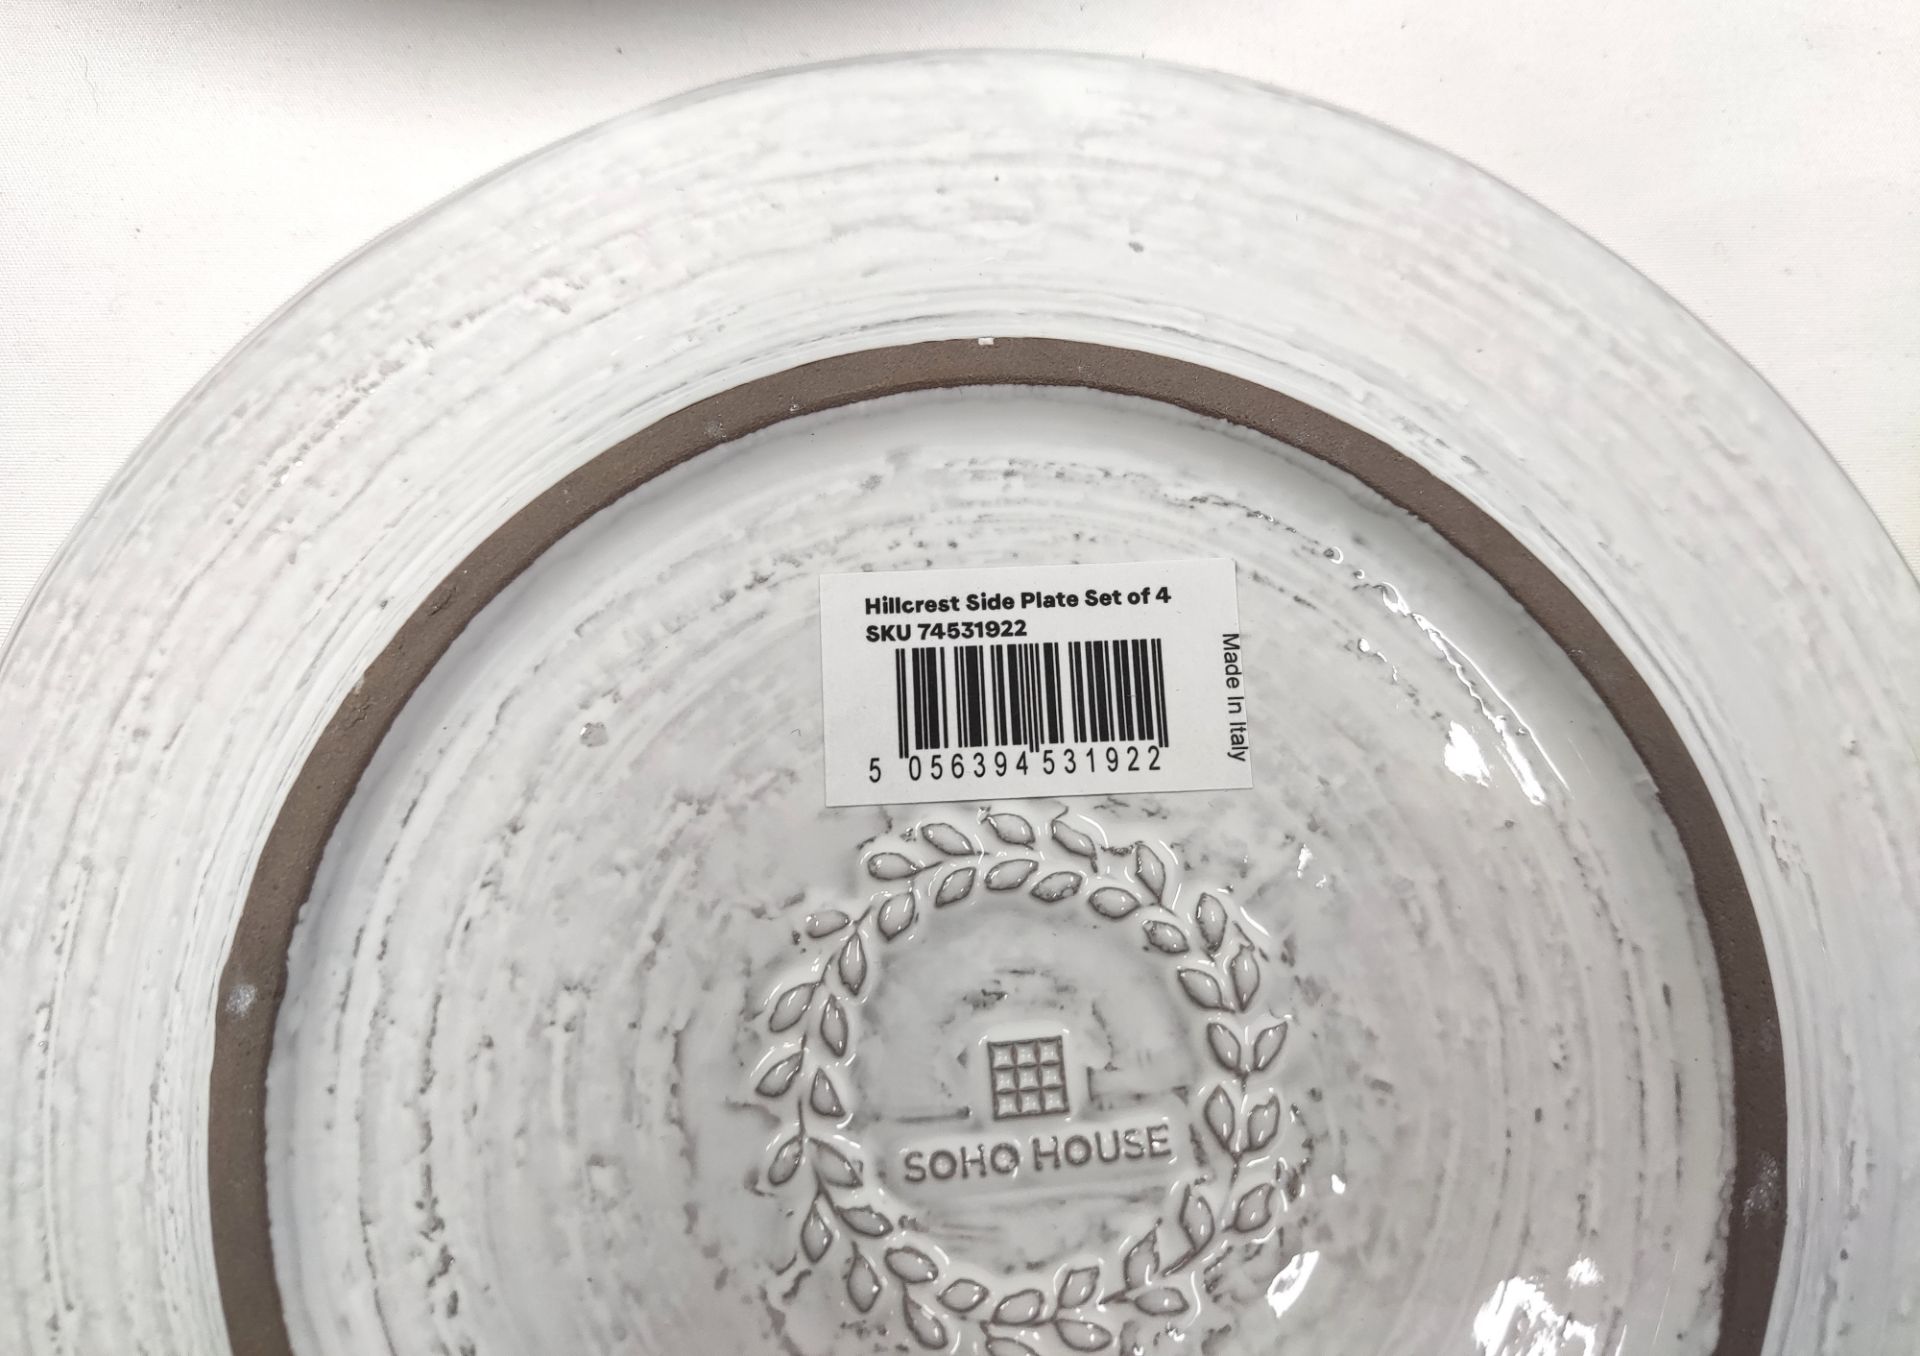 1 x SOHO HOME Set Of Hillcrest Plates - 2 X Side Plate And 2 X Dinner Plate - New/Unused - RRP £ - Image 8 of 12